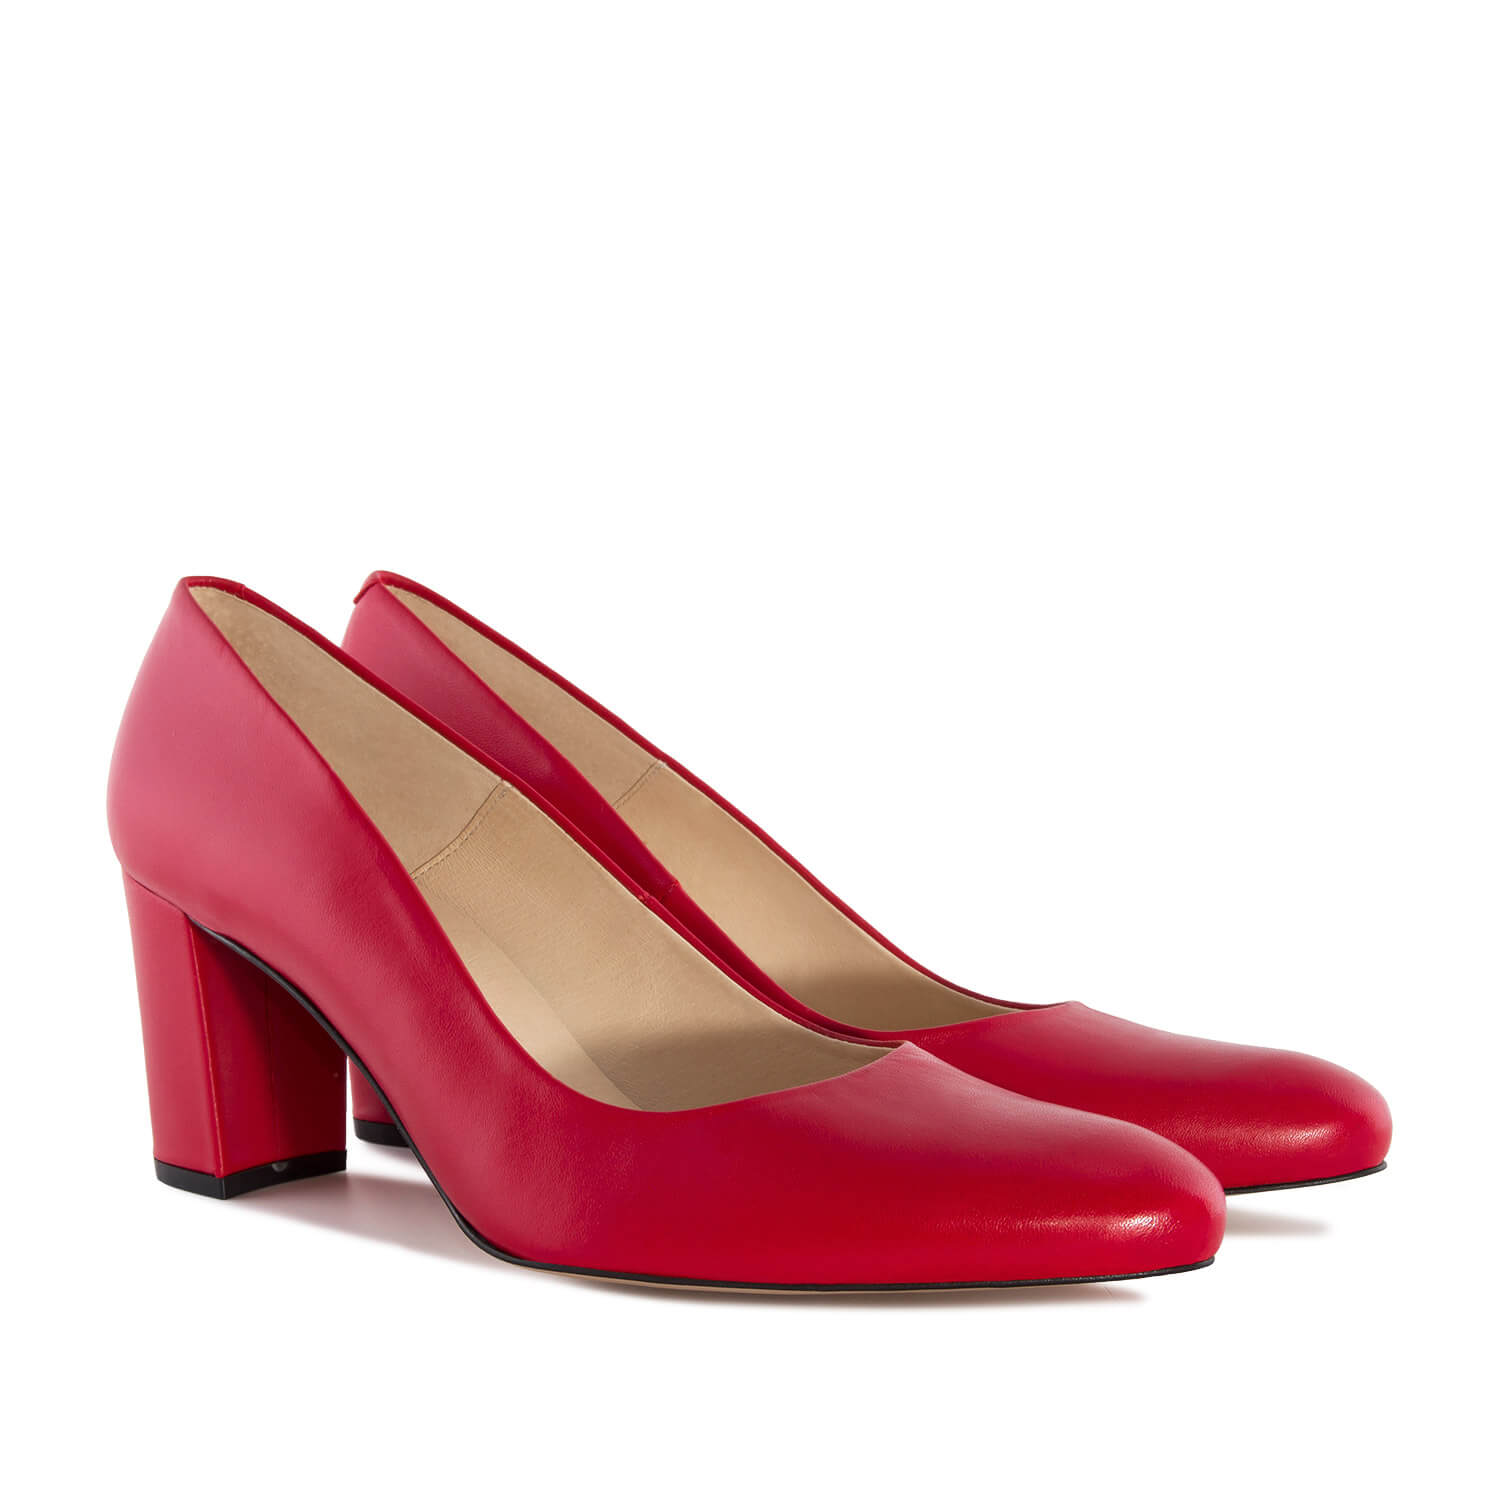 Heeled Shoes in Red Leather 